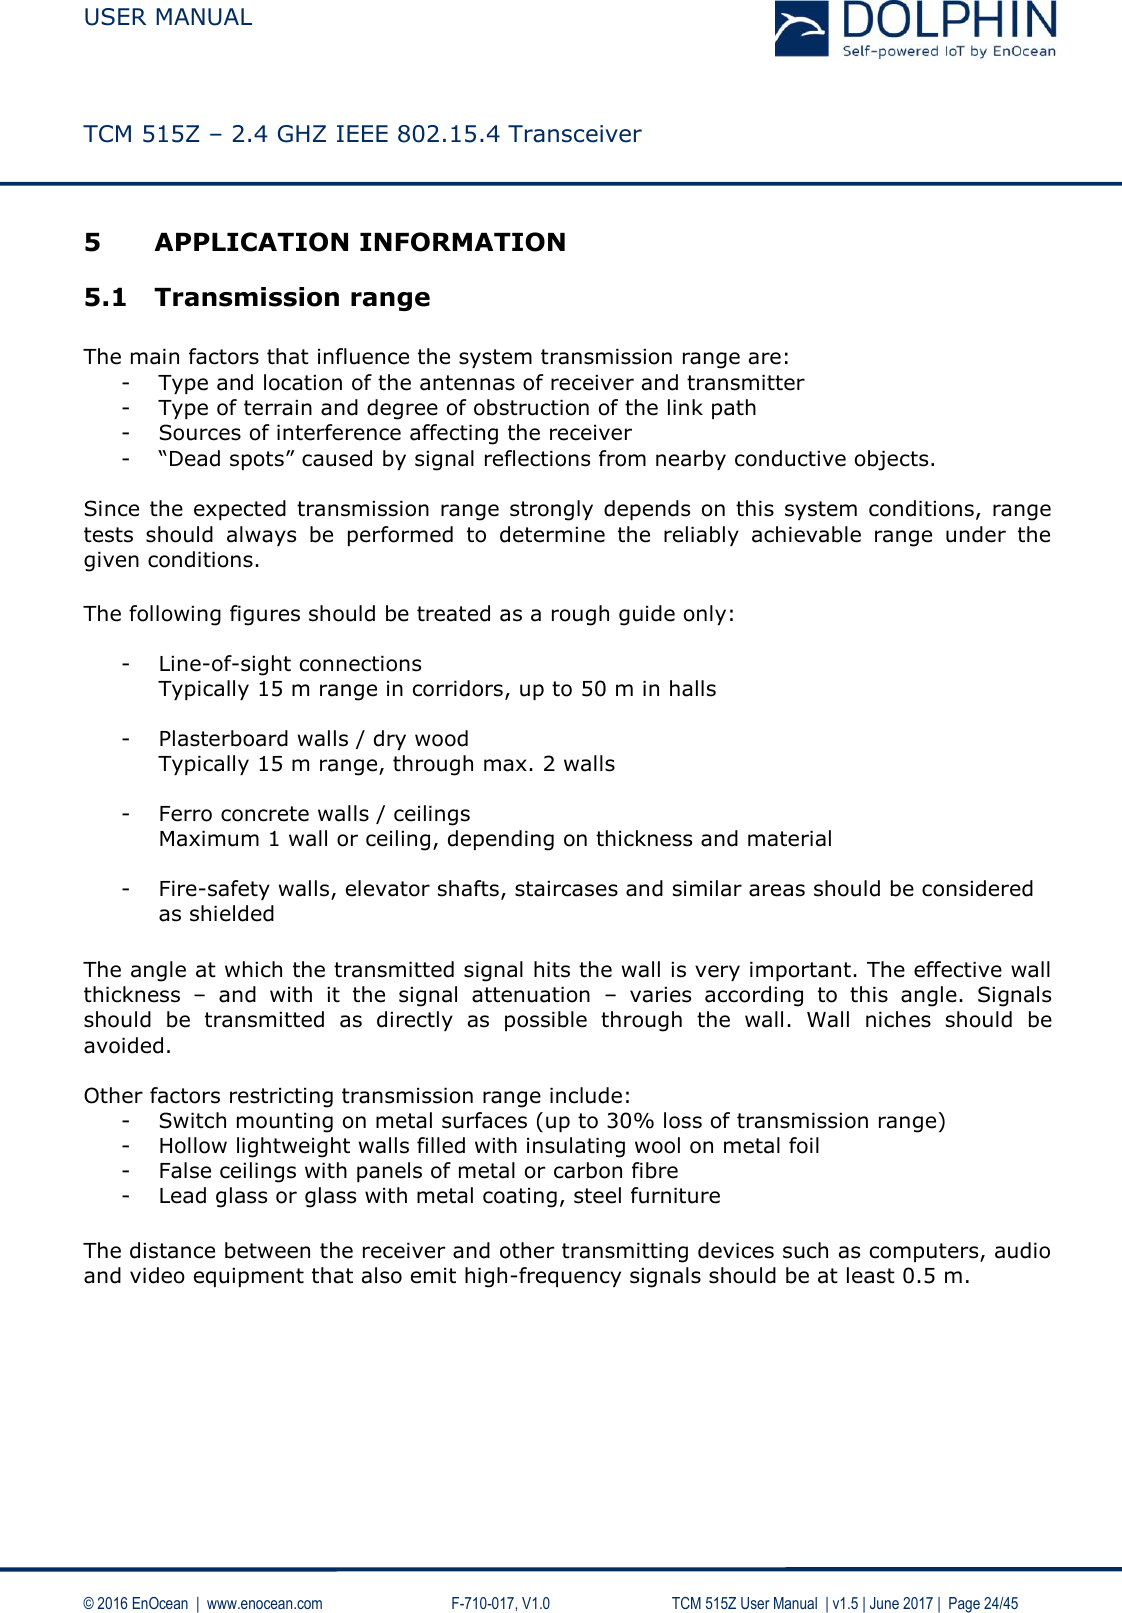  USER MANUAL    TCM 515Z – 2.4 GHZ IEEE 802.15.4 Transceiver   © 2016 EnOcean  |  www.enocean.com     F-710-017, V1.0        TCM 515Z User Manual  | v1.5 | June 2017 |  Page 24/45 5 APPLICATION INFORMATION 5.1 Transmission range  The main factors that influence the system transmission range are: - Type and location of the antennas of receiver and transmitter - Type of terrain and degree of obstruction of the link path - Sources of interference affecting the receiver - “Dead spots” caused by signal reflections from nearby conductive objects.   Since  the expected transmission range  strongly  depends on this system conditions, range tests  should  always  be  performed  to  determine  the  reliably  achievable  range  under  the given conditions. The following figures should be treated as a rough guide only:  - Line-of-sight connections Typically 15 m range in corridors, up to 50 m in halls  - Plasterboard walls / dry wood Typically 15 m range, through max. 2 walls  - Ferro concrete walls / ceilings Maximum 1 wall or ceiling, depending on thickness and material  - Fire-safety walls, elevator shafts, staircases and similar areas should be considered as shielded  The angle at which the transmitted signal hits the wall is very important. The effective wall thickness  –  and  with  it  the  signal  attenuation  –  varies  according  to  this  angle.  Signals should  be  transmitted  as  directly  as  possible  through  the  wall.  Wall  niches  should  be avoided.   Other factors restricting transmission range include: - Switch mounting on metal surfaces (up to 30% loss of transmission range) - Hollow lightweight walls filled with insulating wool on metal foil - False ceilings with panels of metal or carbon fibre - Lead glass or glass with metal coating, steel furniture The distance between the receiver and other transmitting devices such as computers, audio and video equipment that also emit high-frequency signals should be at least 0.5 m.     